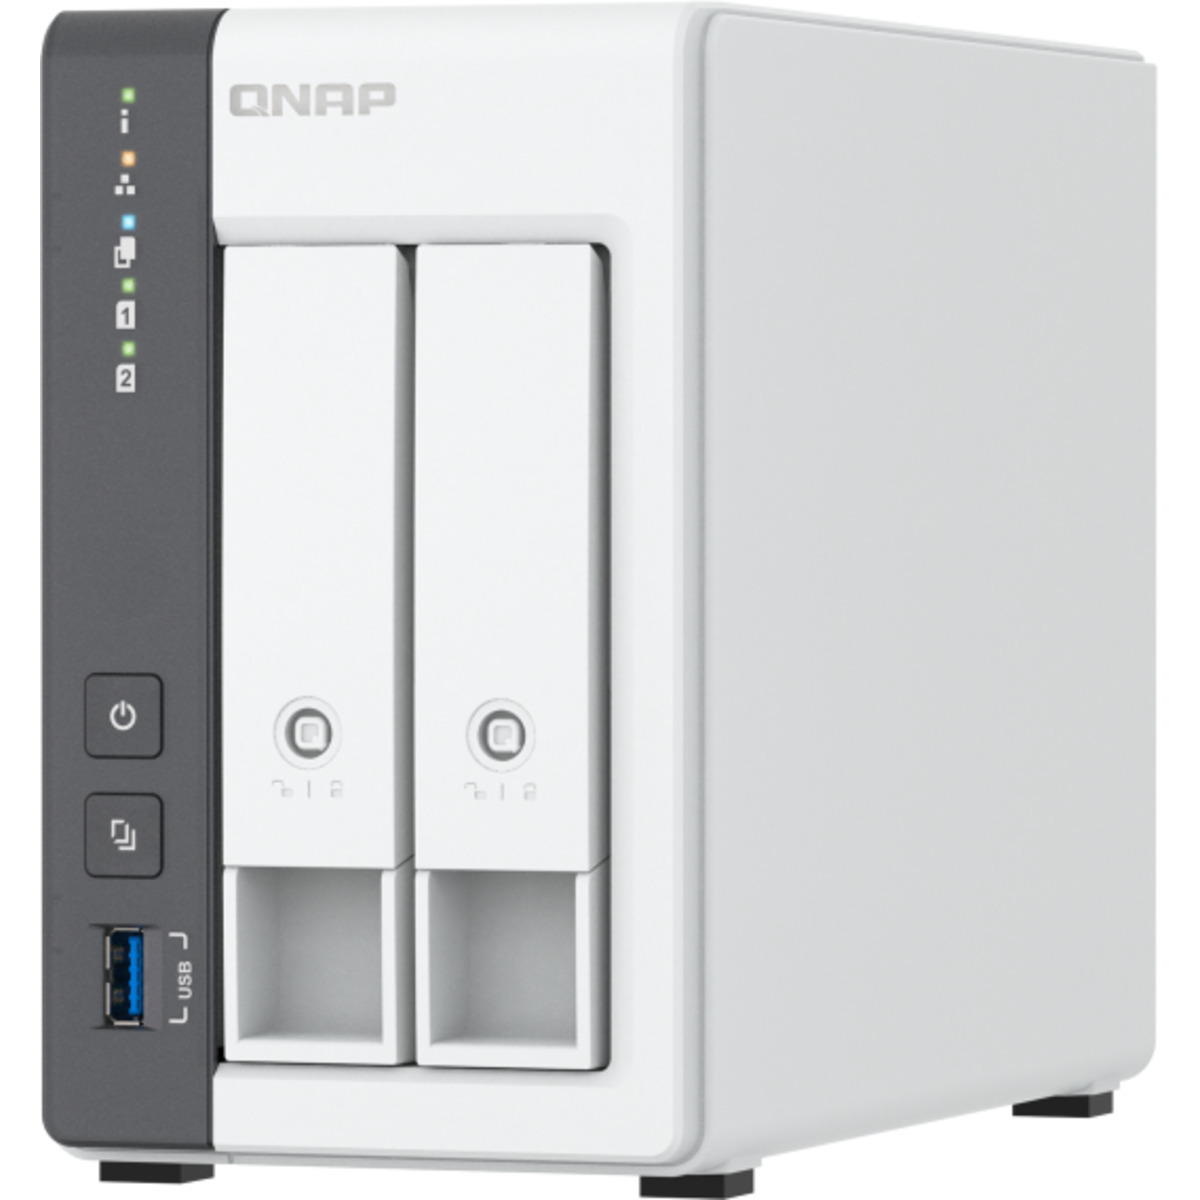 QNAP TS-216G 18tb 2-Bay Desktop Personal / Basic Home / Small Office NAS - Network Attached Storage Device 1x18tb Western Digital Ultrastar DC HC550 WUH721818ALE6L4 3.5 7200rpm SATA 6Gb/s HDD ENTERPRISE Class Drives Installed - Burn-In Tested TS-216G